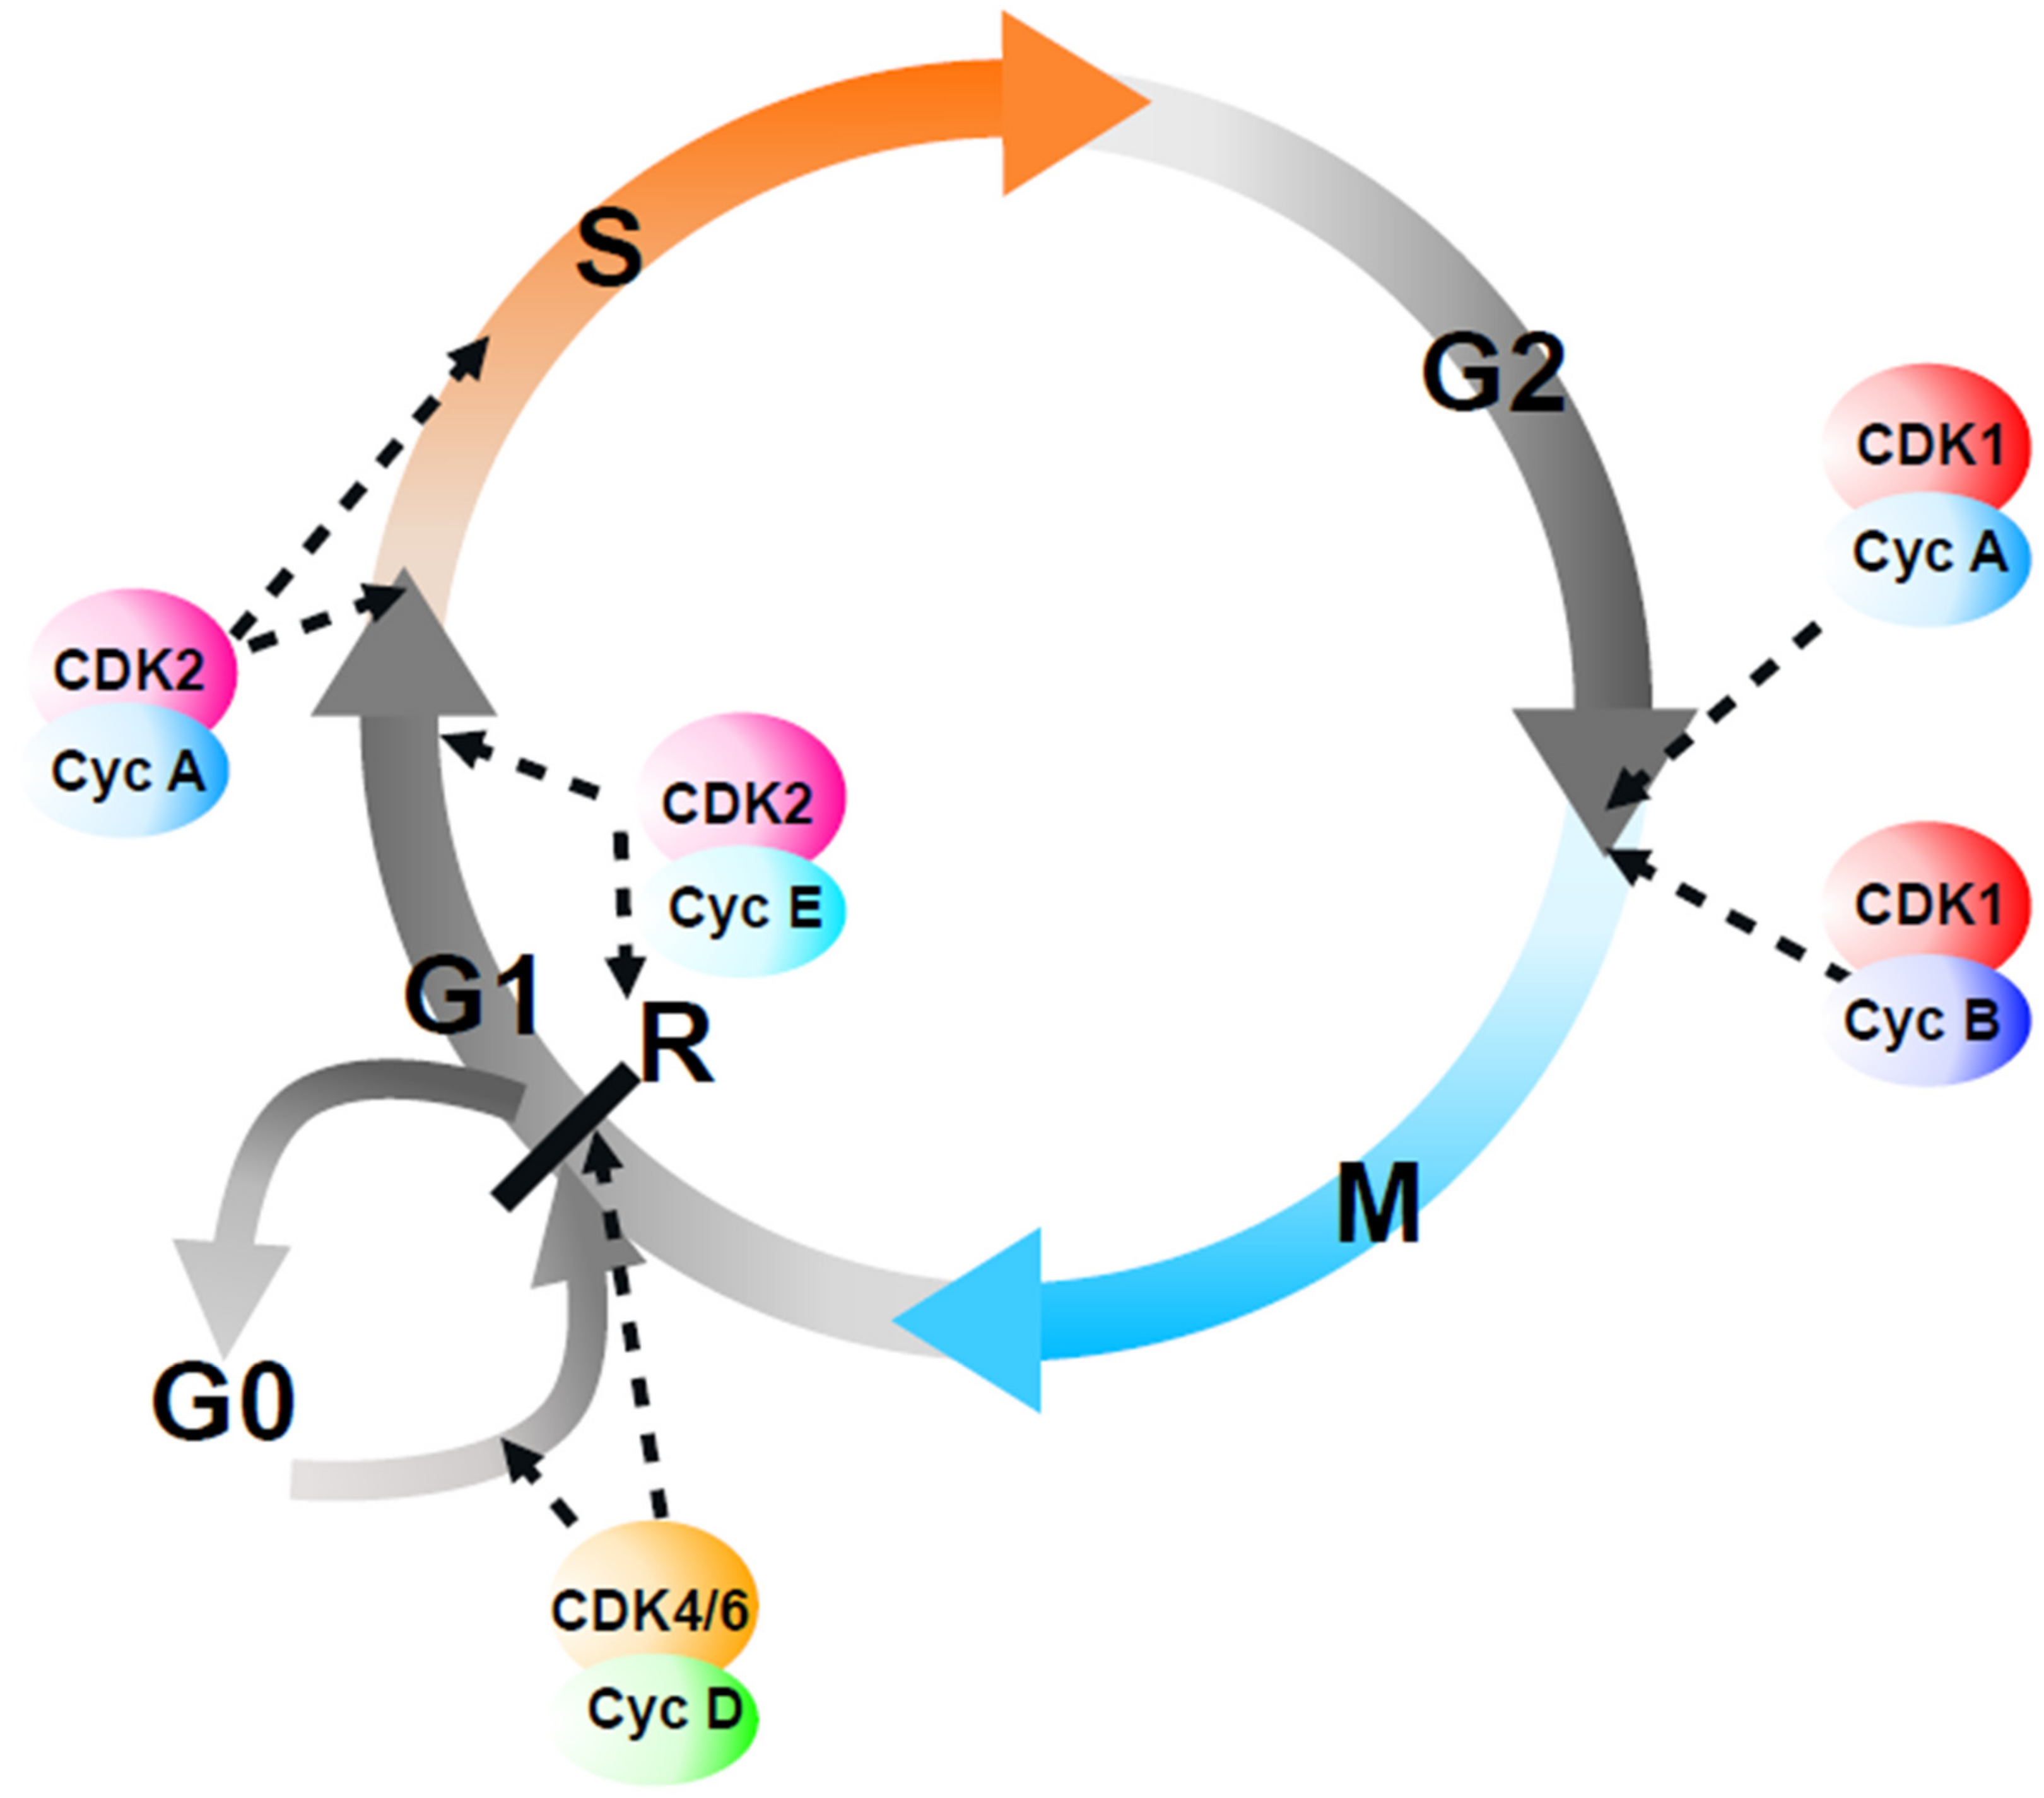 Replicatively senescent cells are arrested in G1 and G2 phases - Figure F1